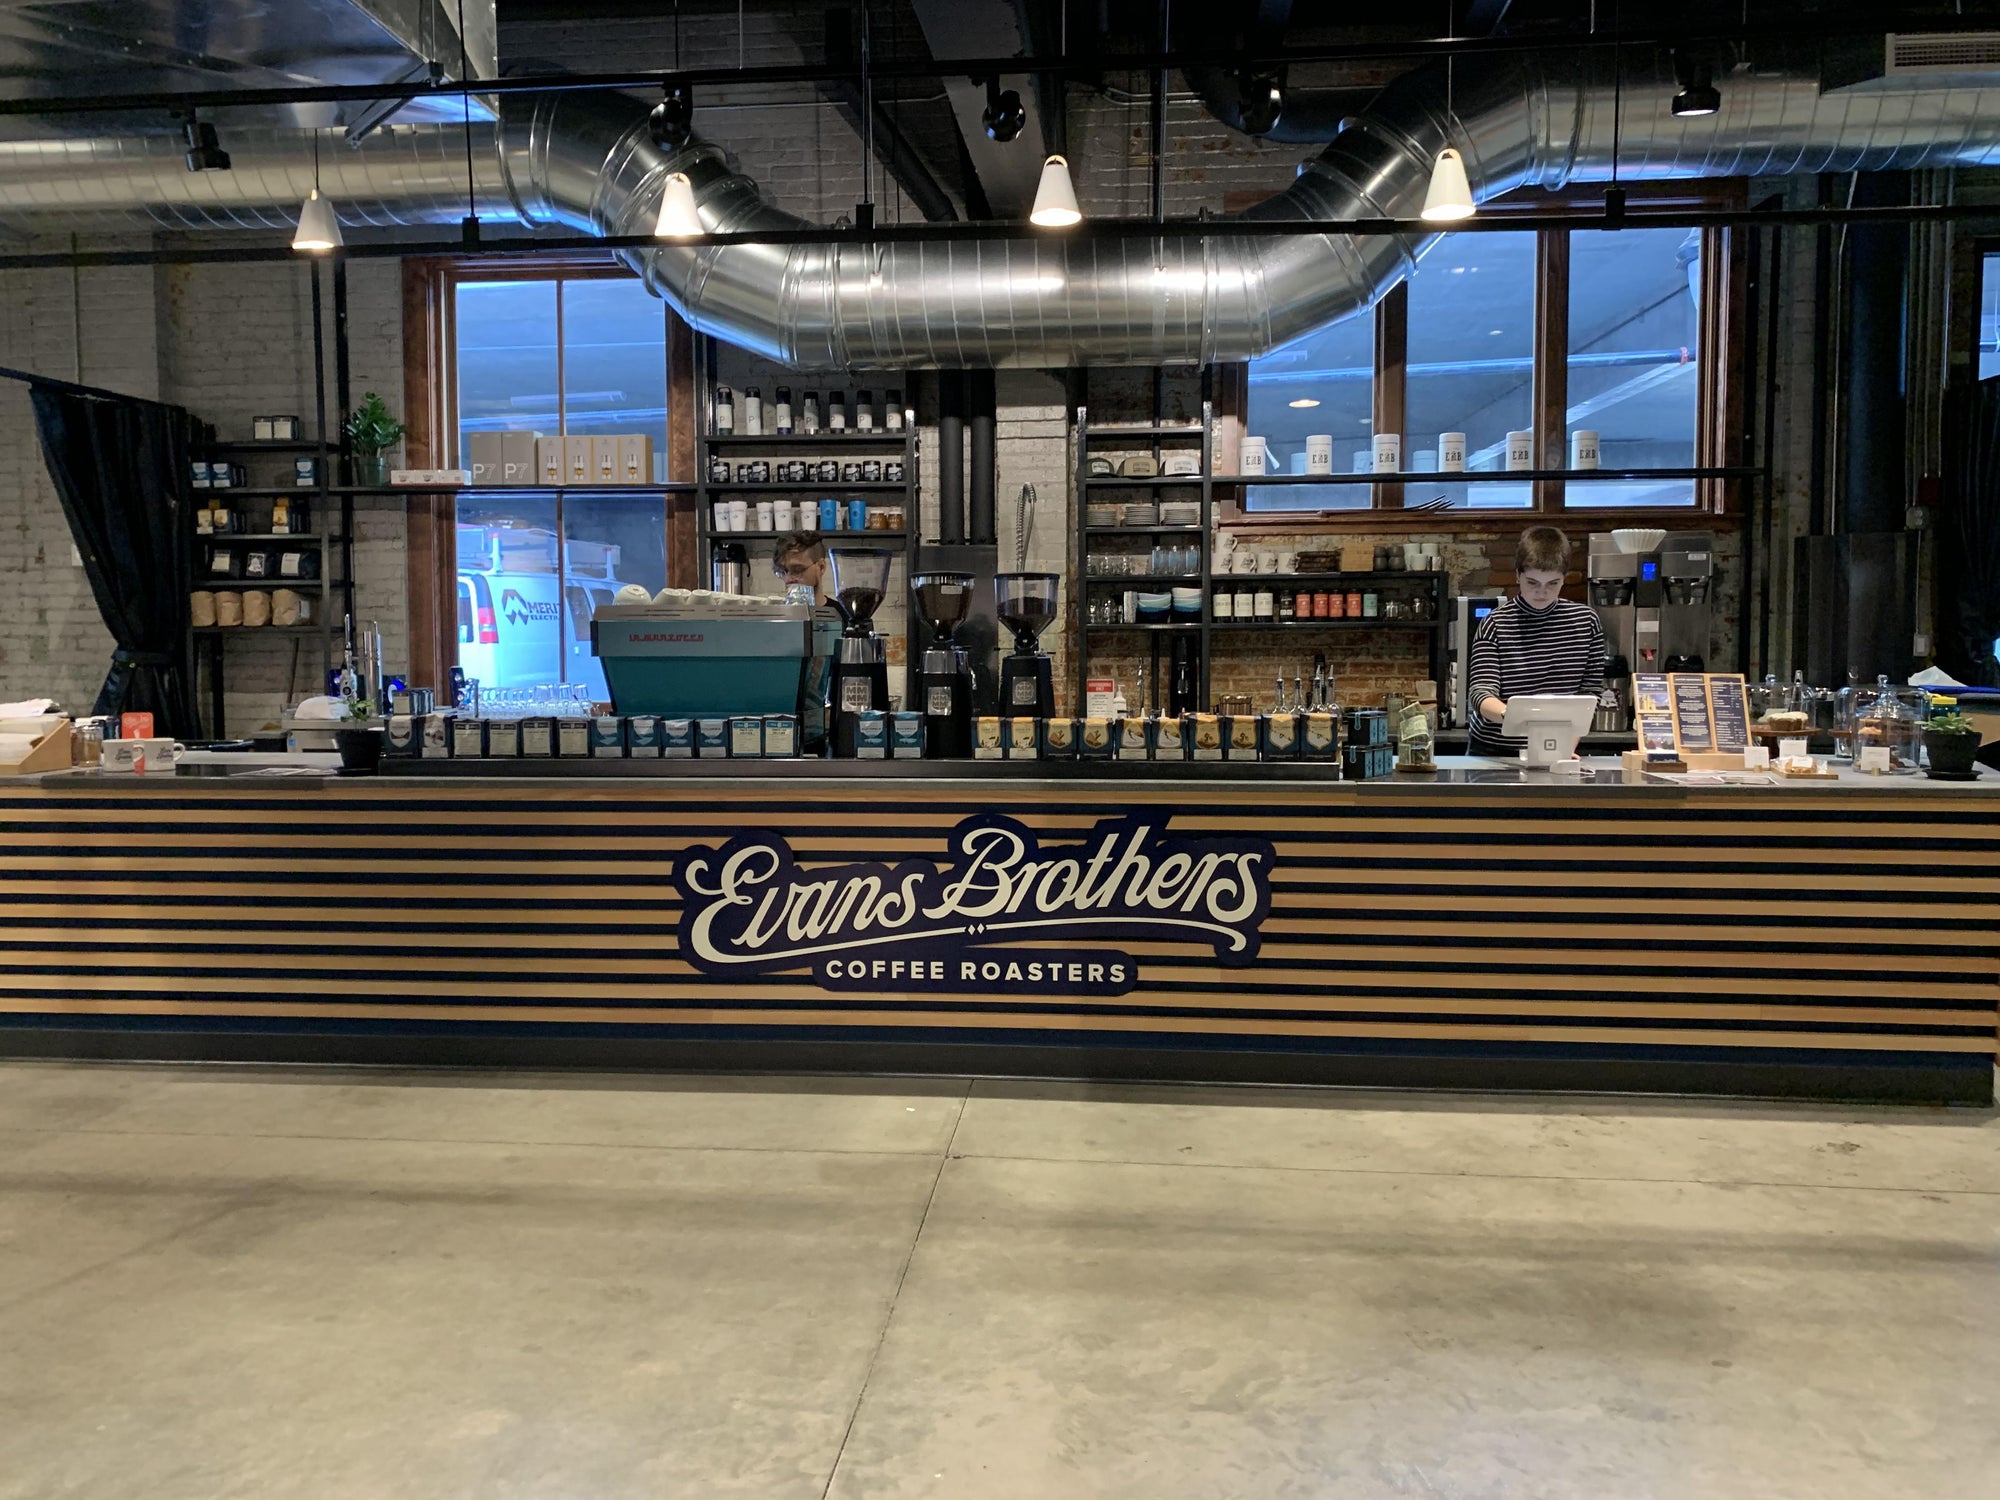 Evans Brothers Coffee: Specialty Roasters